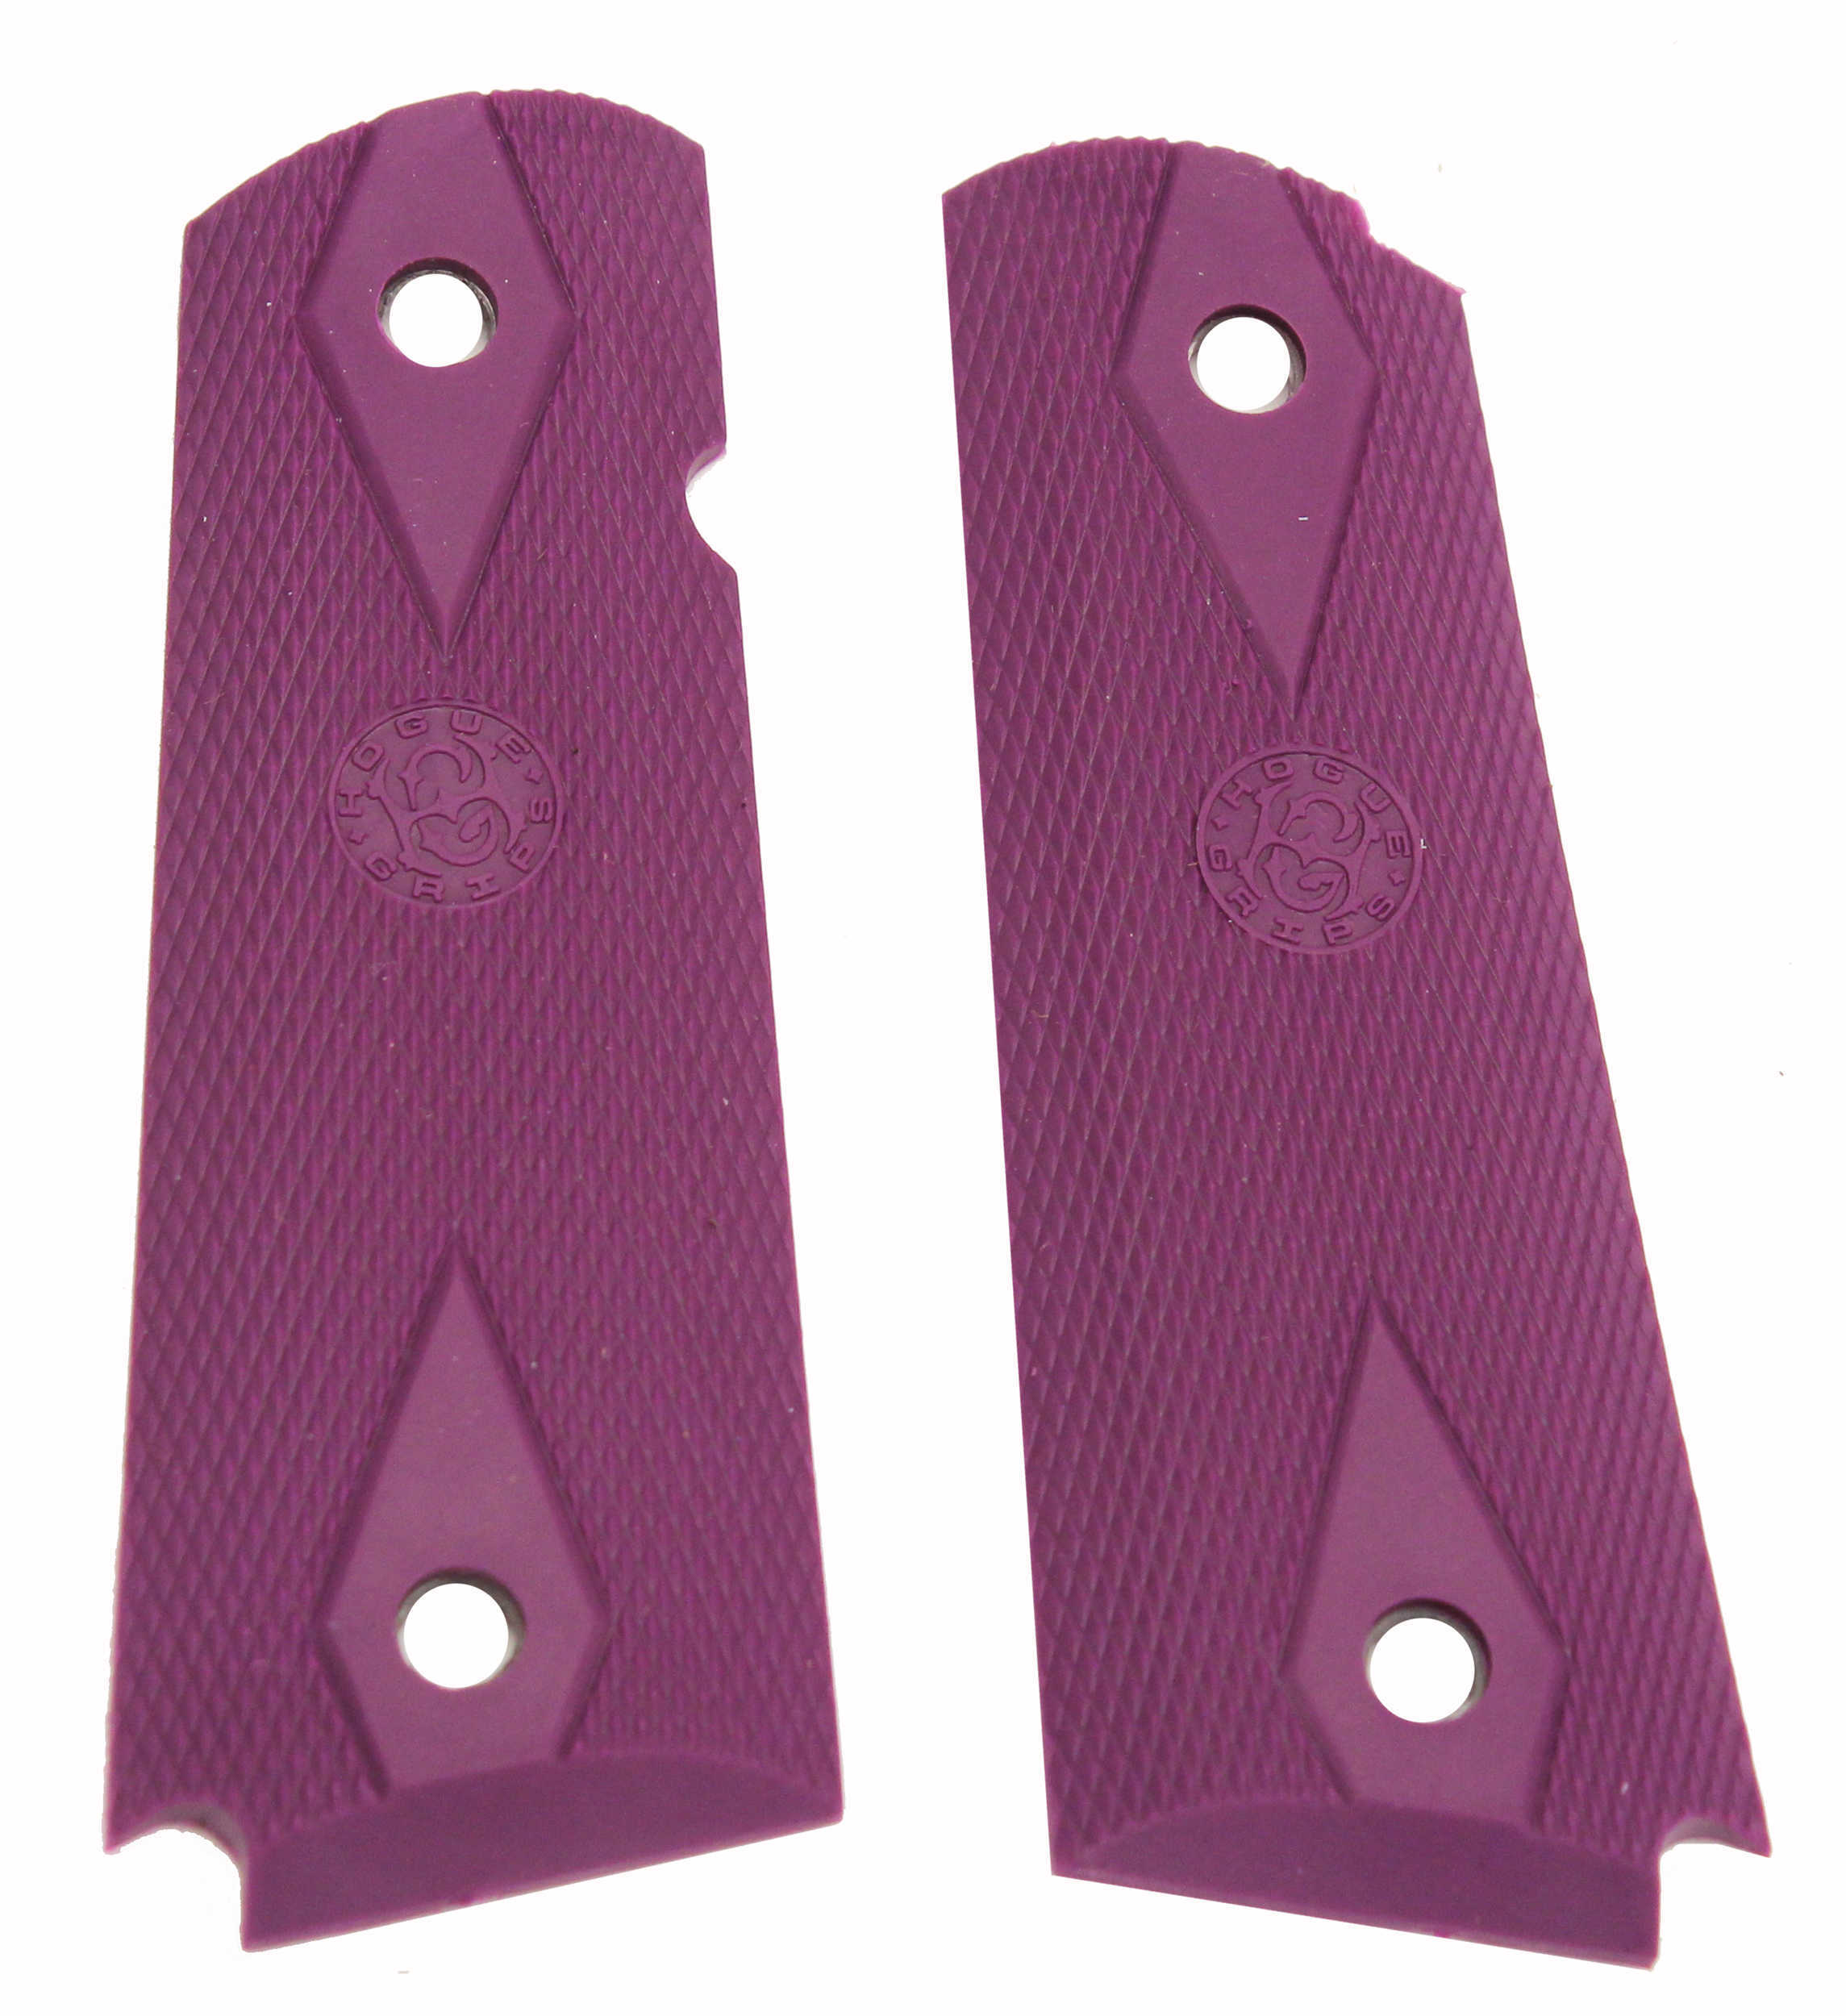 Hogue Colt Government Rubber Grip Panels Checkered with Diamonds Purple Md: 45016